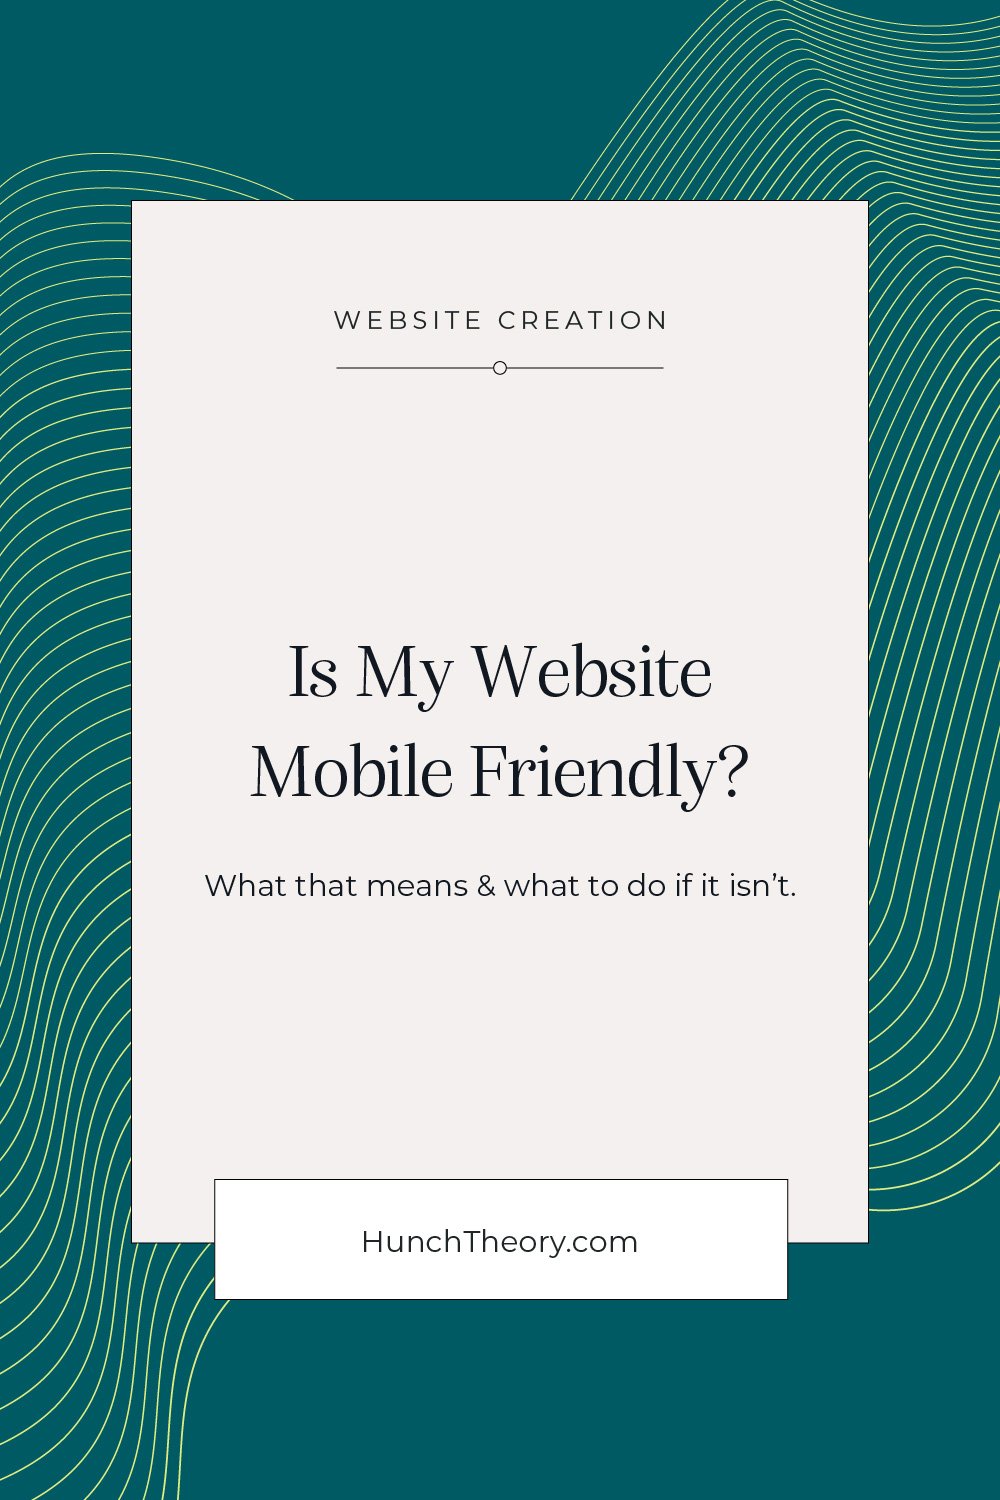 Is my website mobile friendly